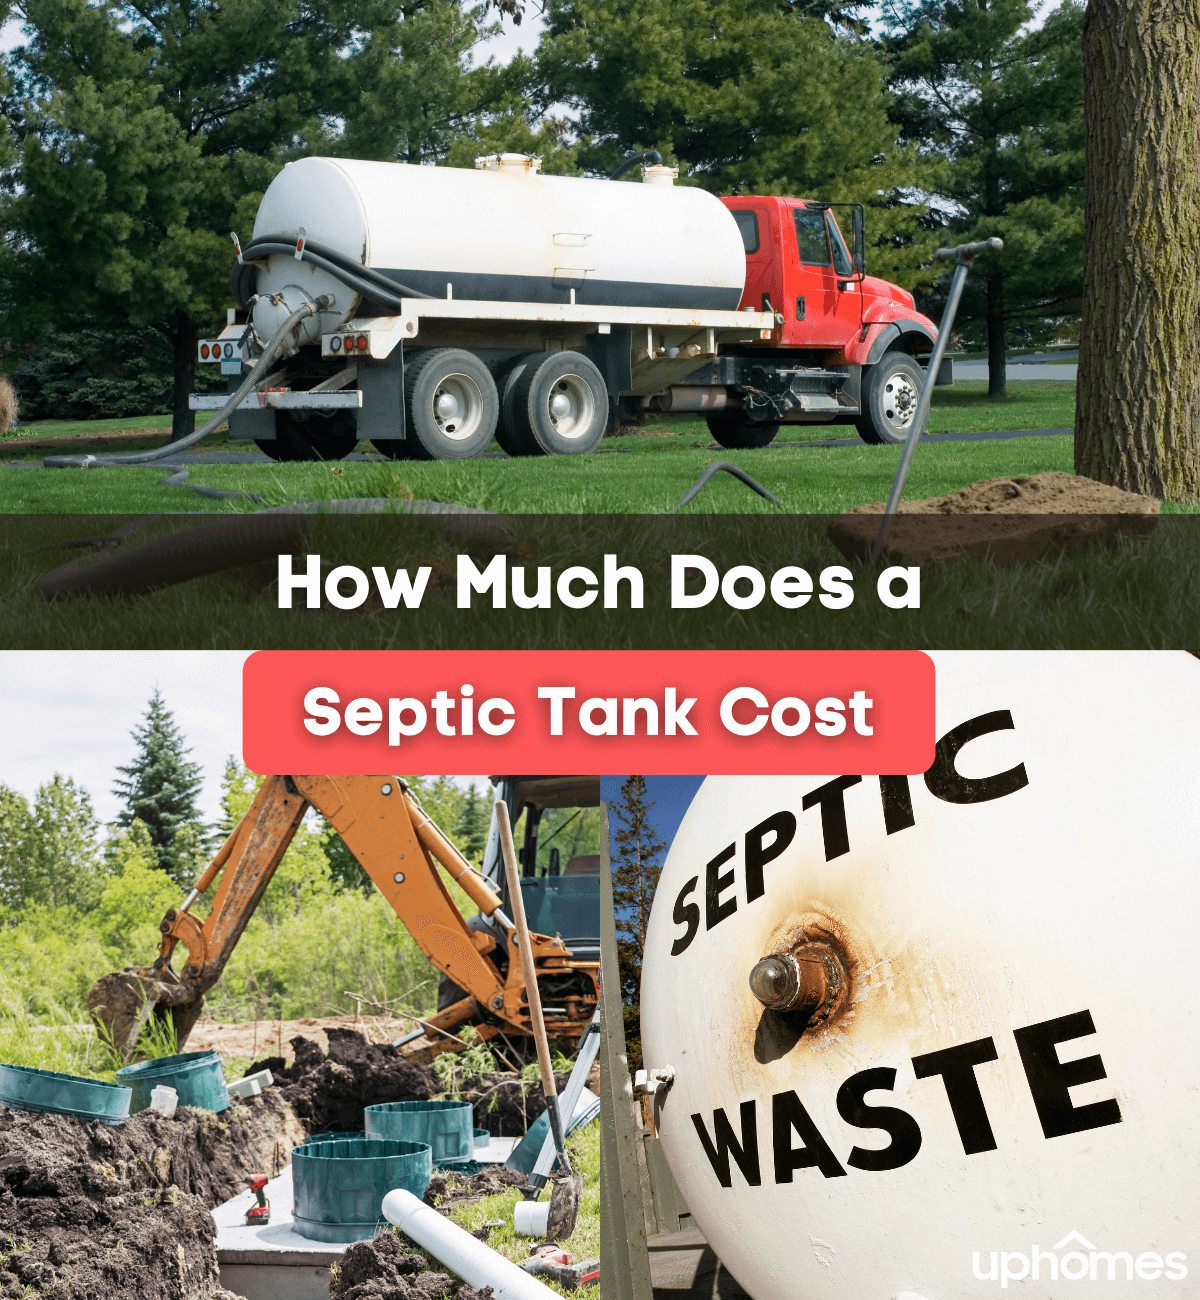 How much does a septic tank cost - what is the cost to replace a septic tank?